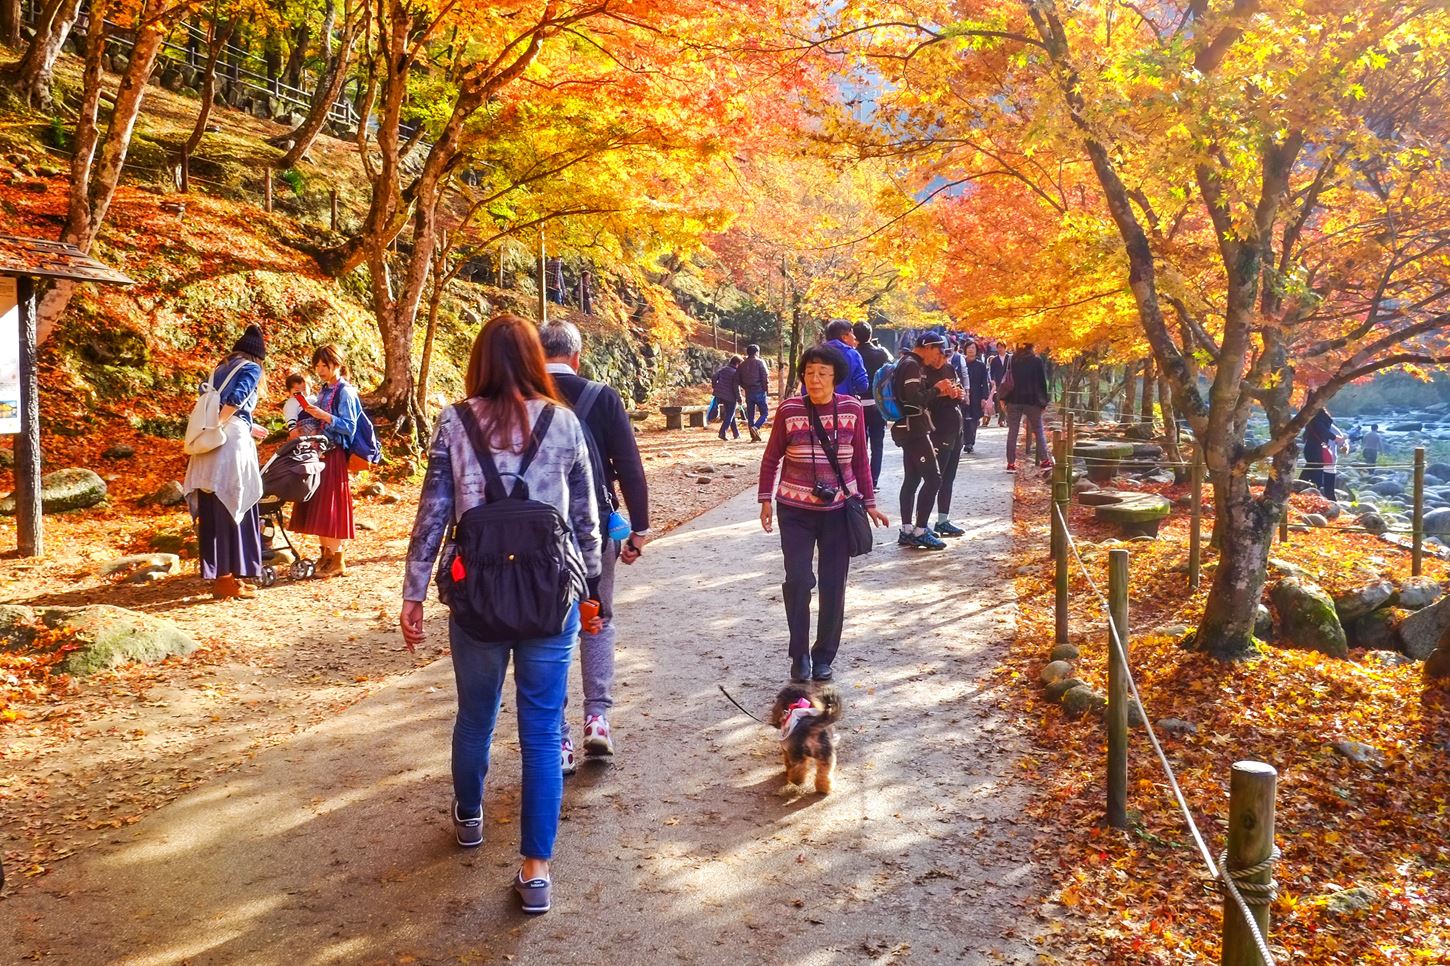 Sightseeing scenery that simply shows the weather Nagoya in November4